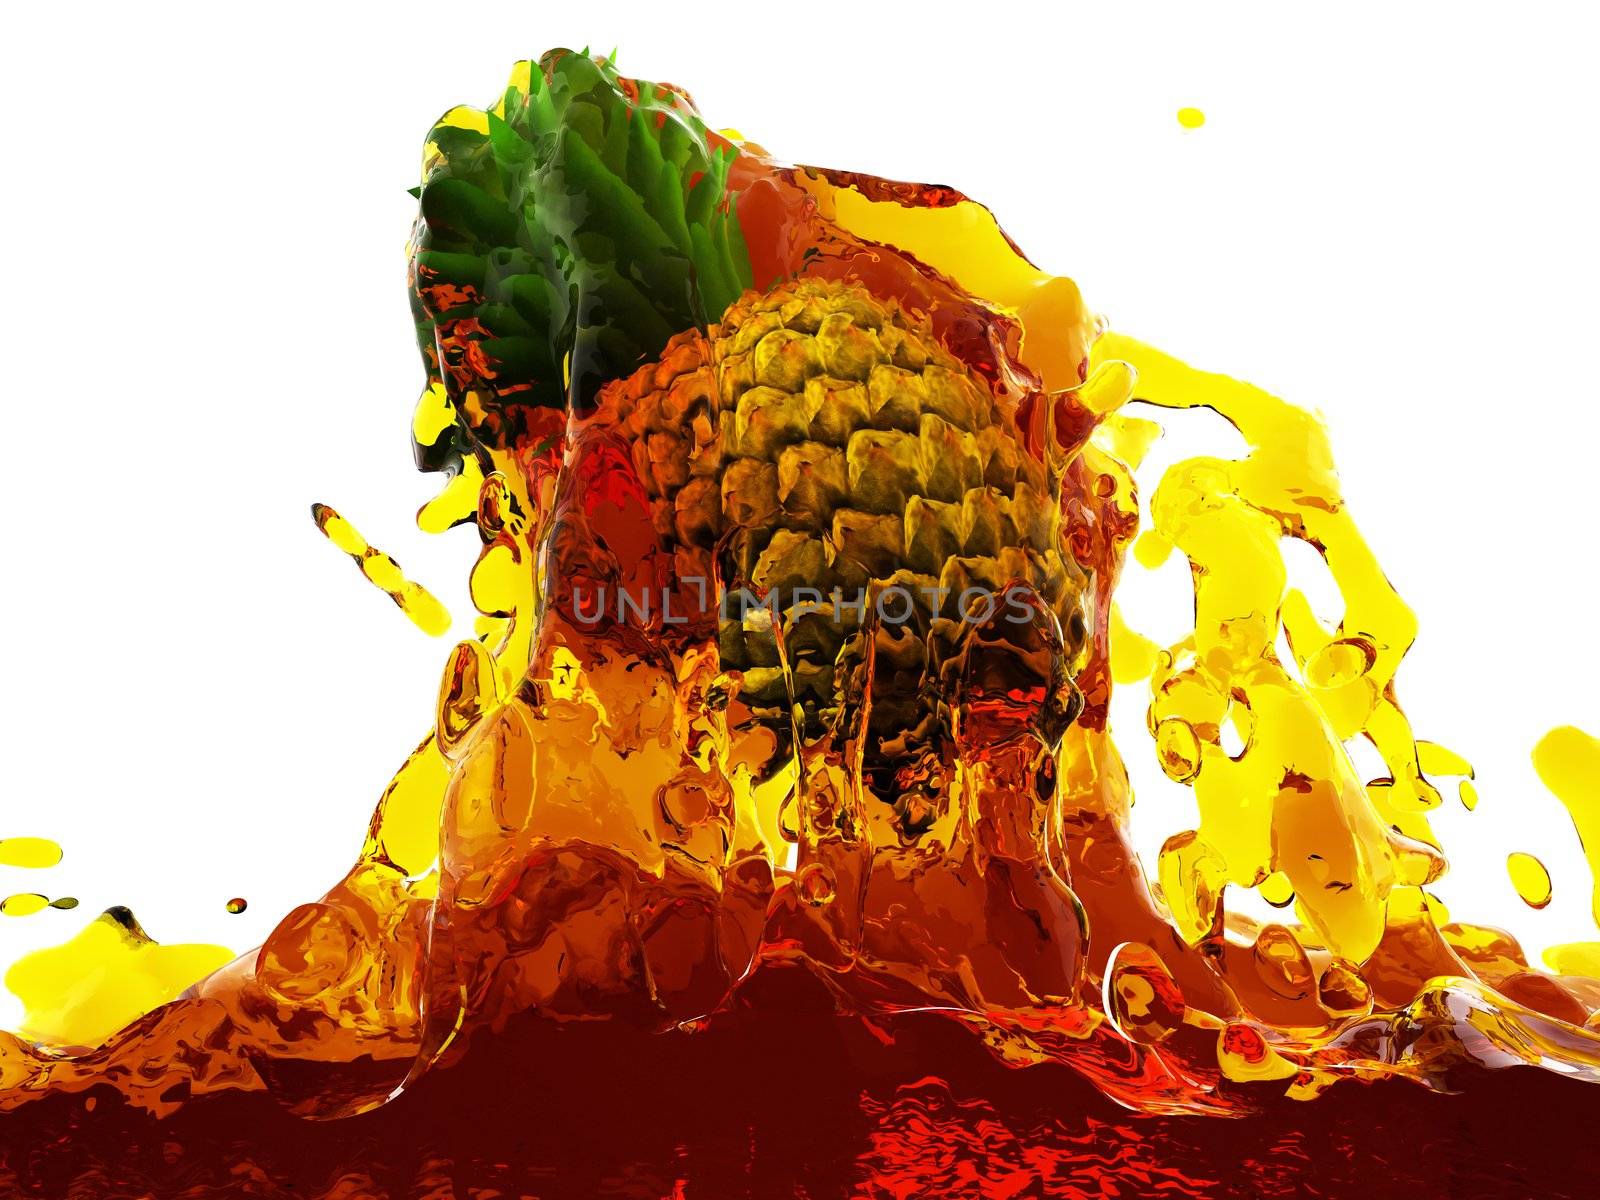 Pineapple in juice made in 3D